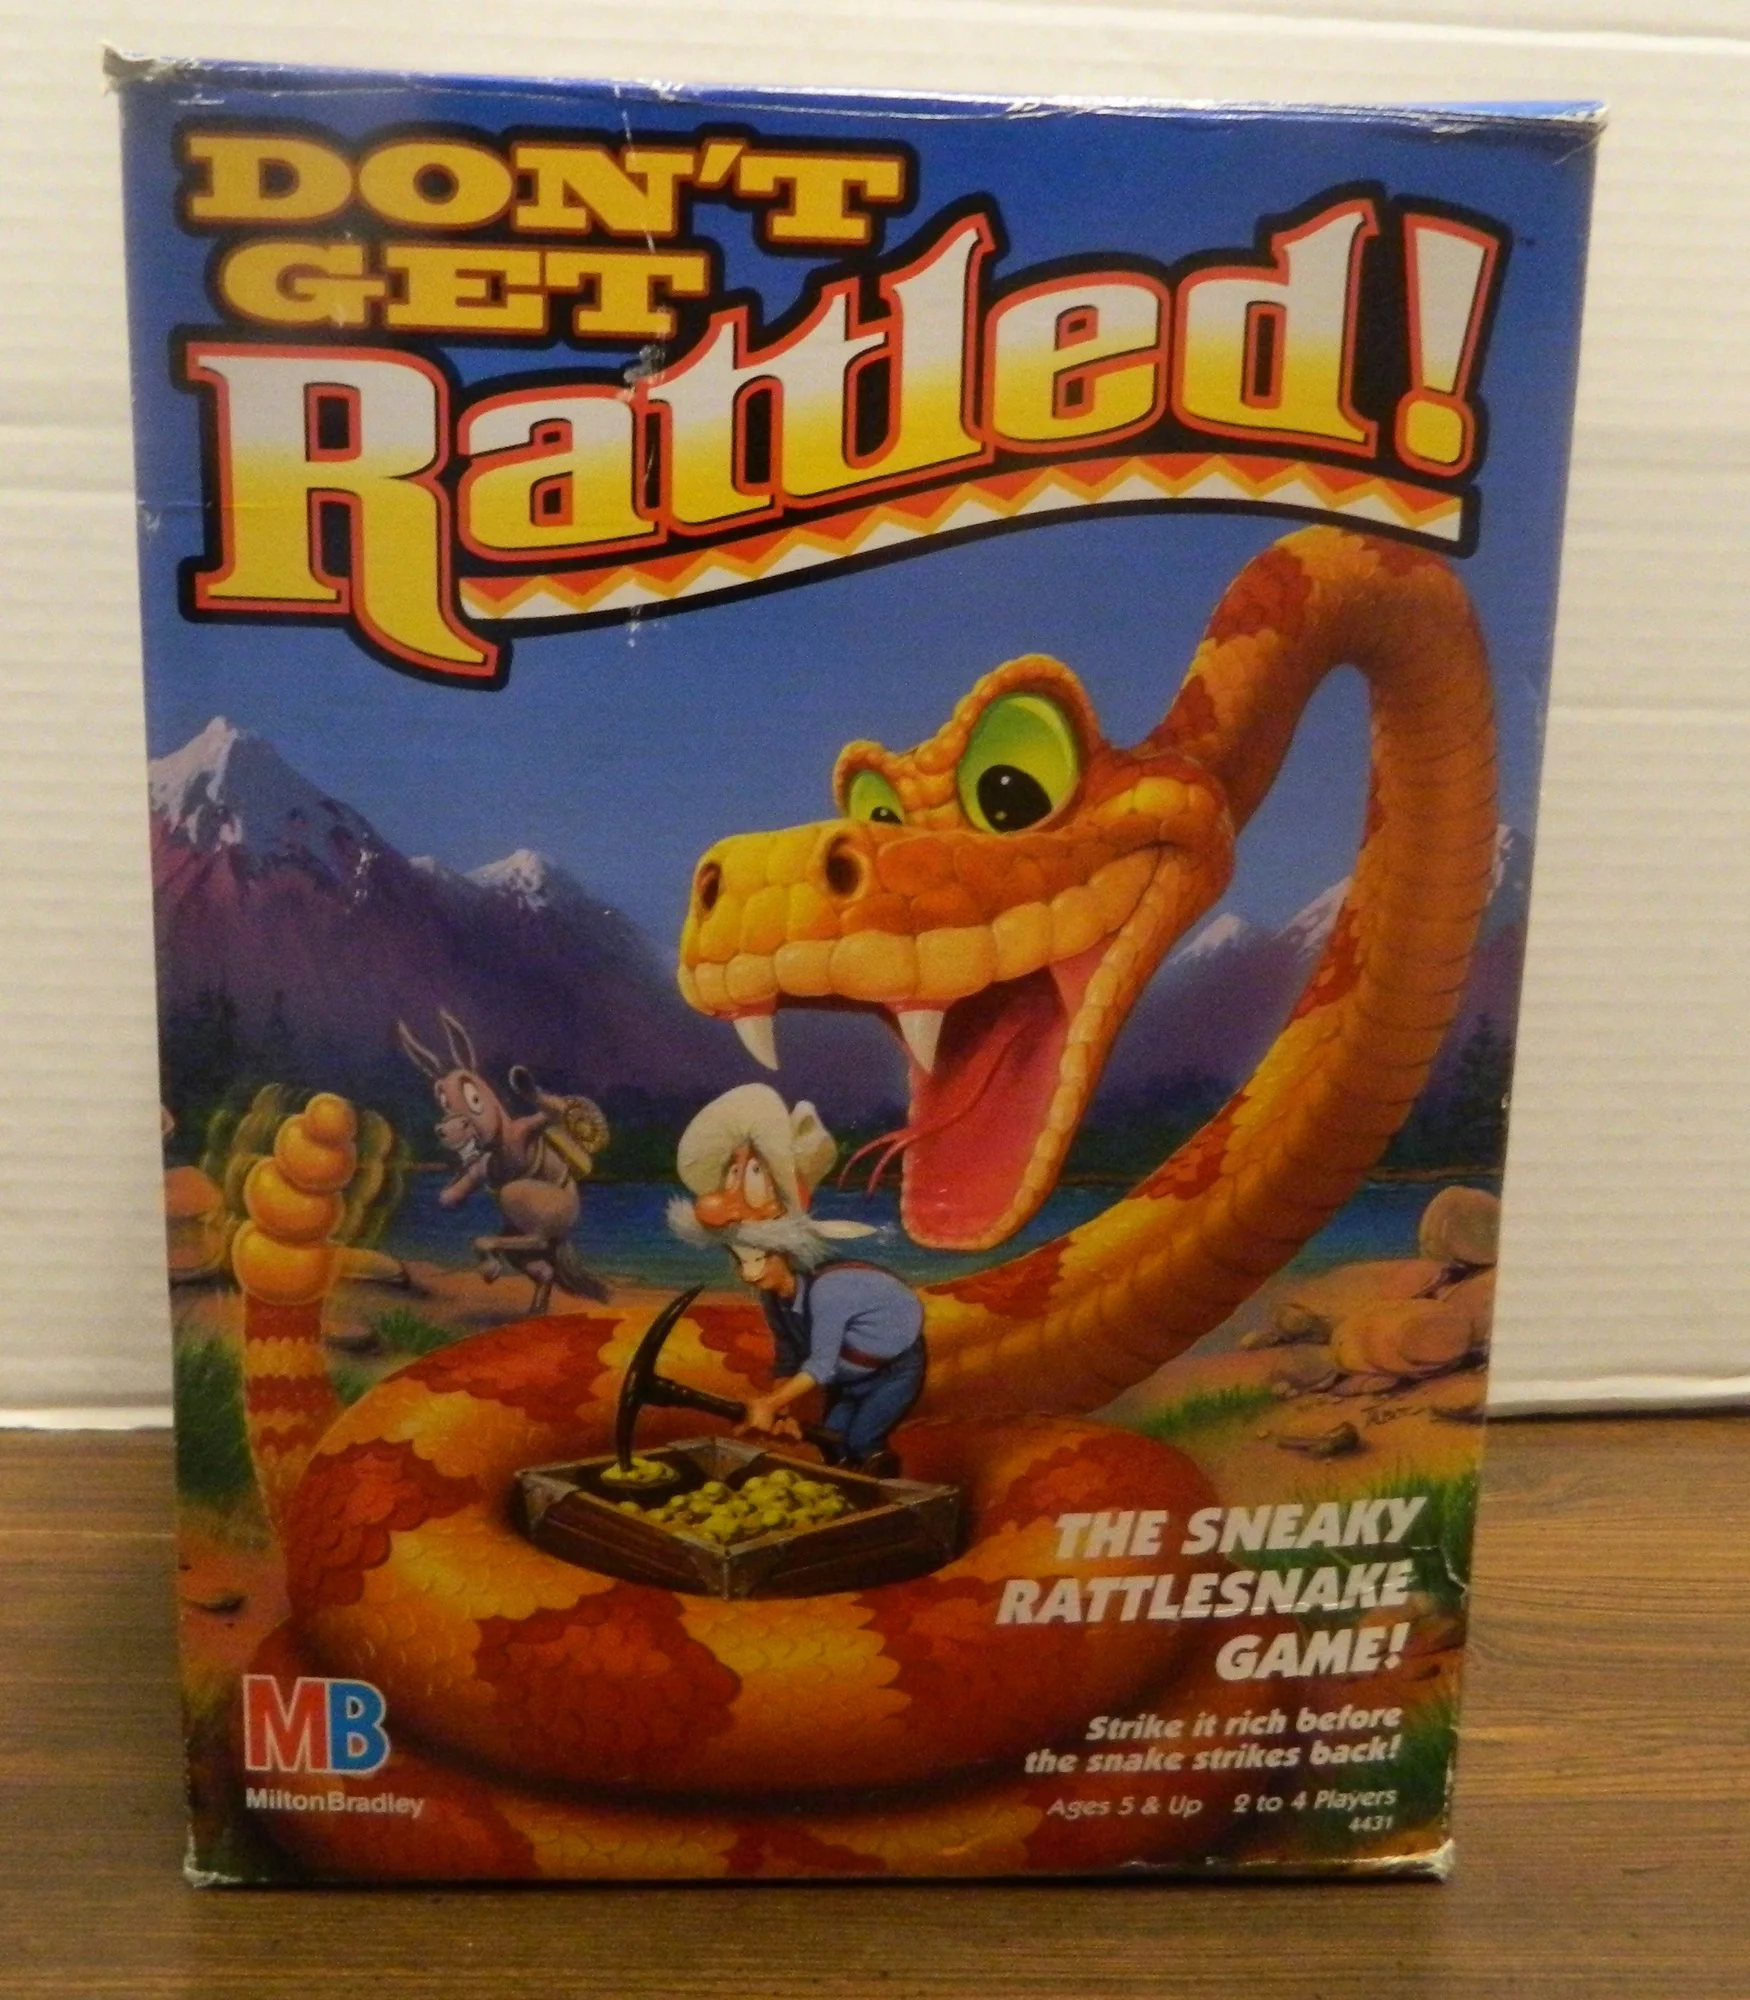 Box for Don't Get Rattled